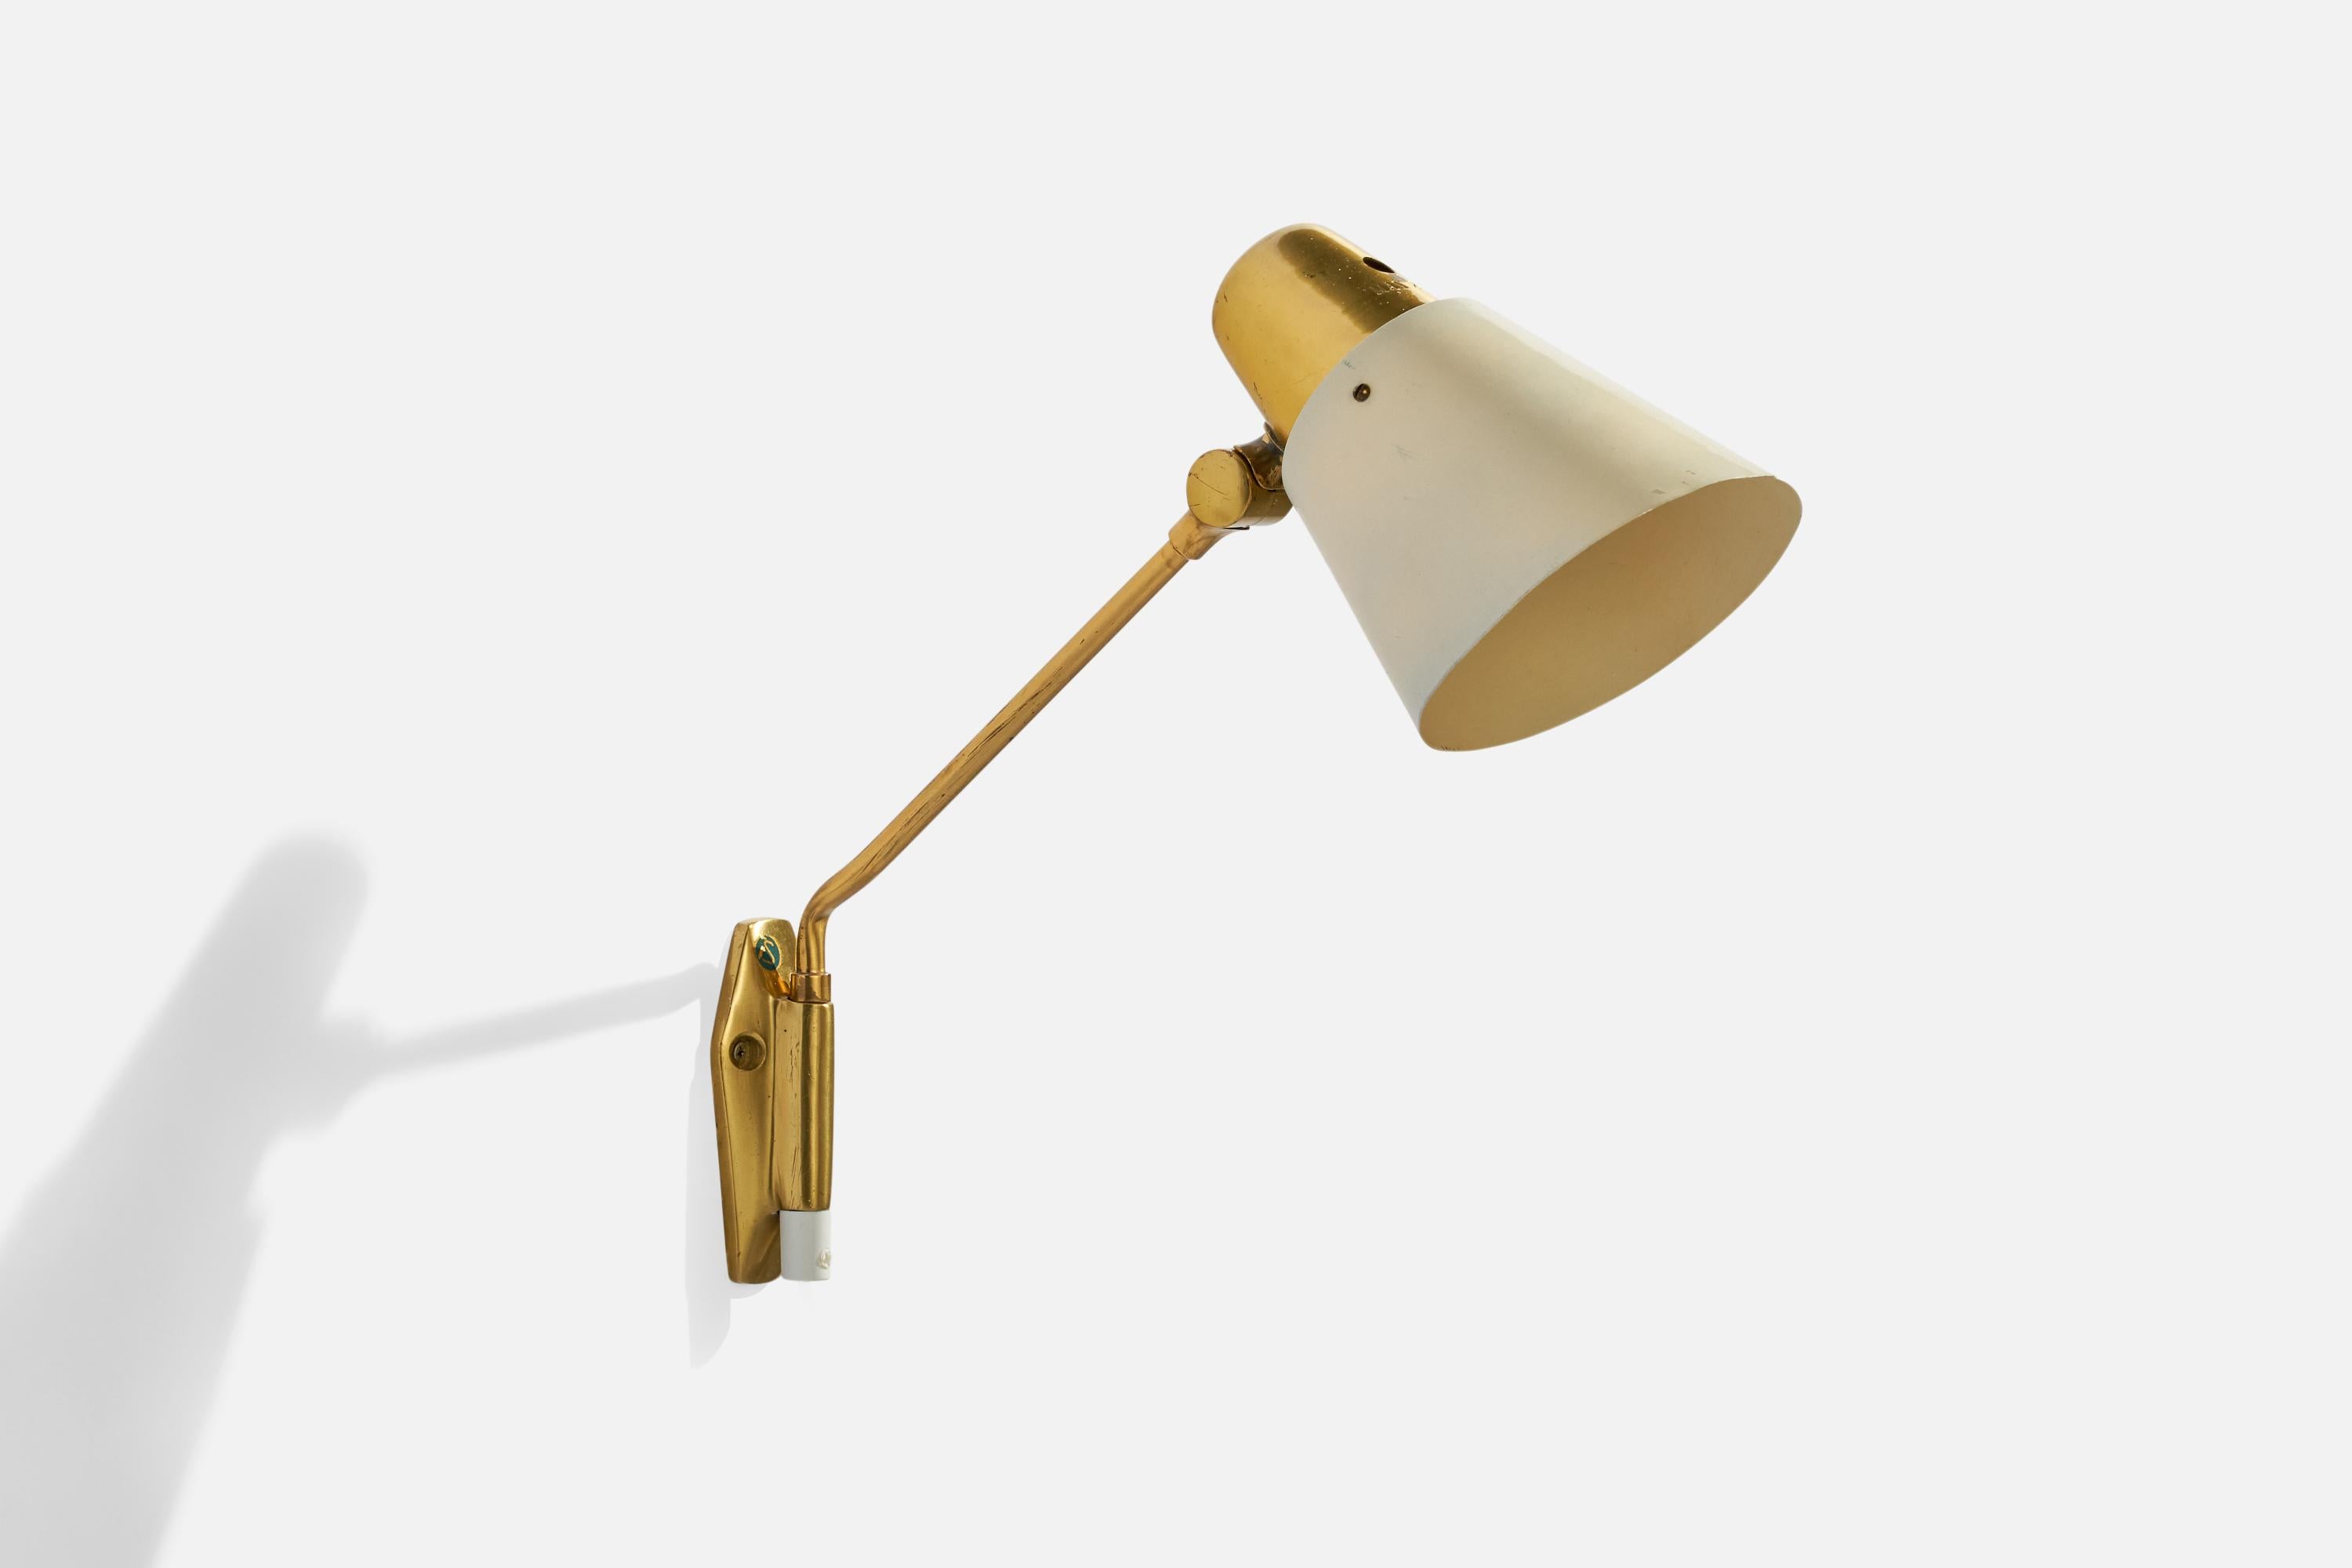 An adjustable brass and off-white lacquered metal wall light designed and produced by Karlskrona Lampfabrik, Sweden, 1950s.

Overall Dimensions (inches): 11.5” H x 5.25 W x 13.5” D
Back Plate Dimensions (inches): 4.5” H x 2”  W x 1.1” D
Bulb